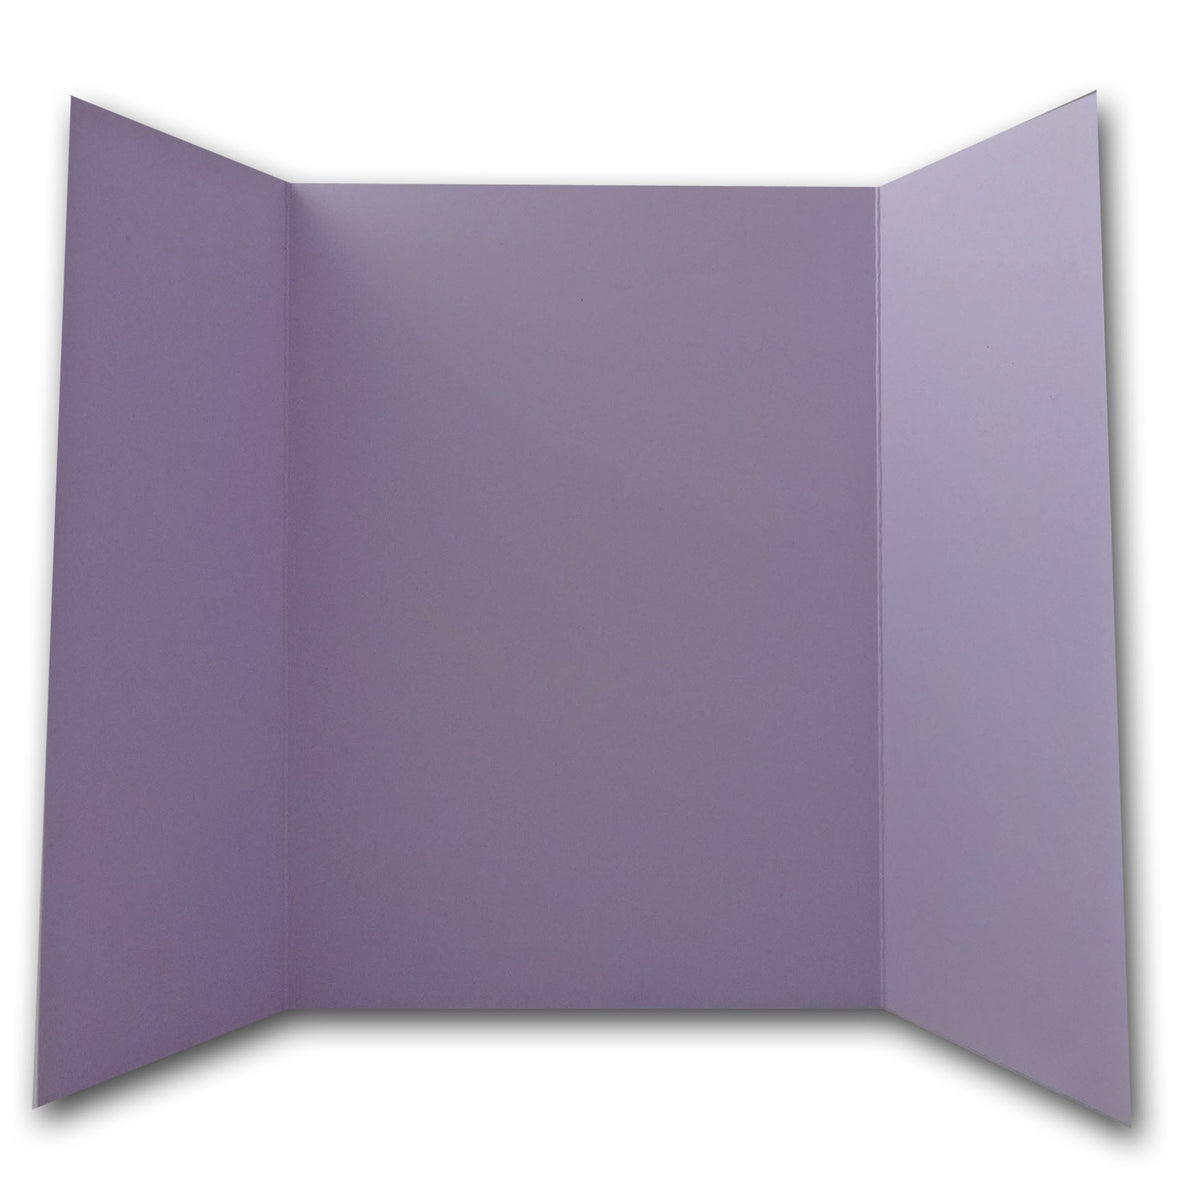 Lilac 5x7 Gate Fold Discount Card Stock for DIY Invitations